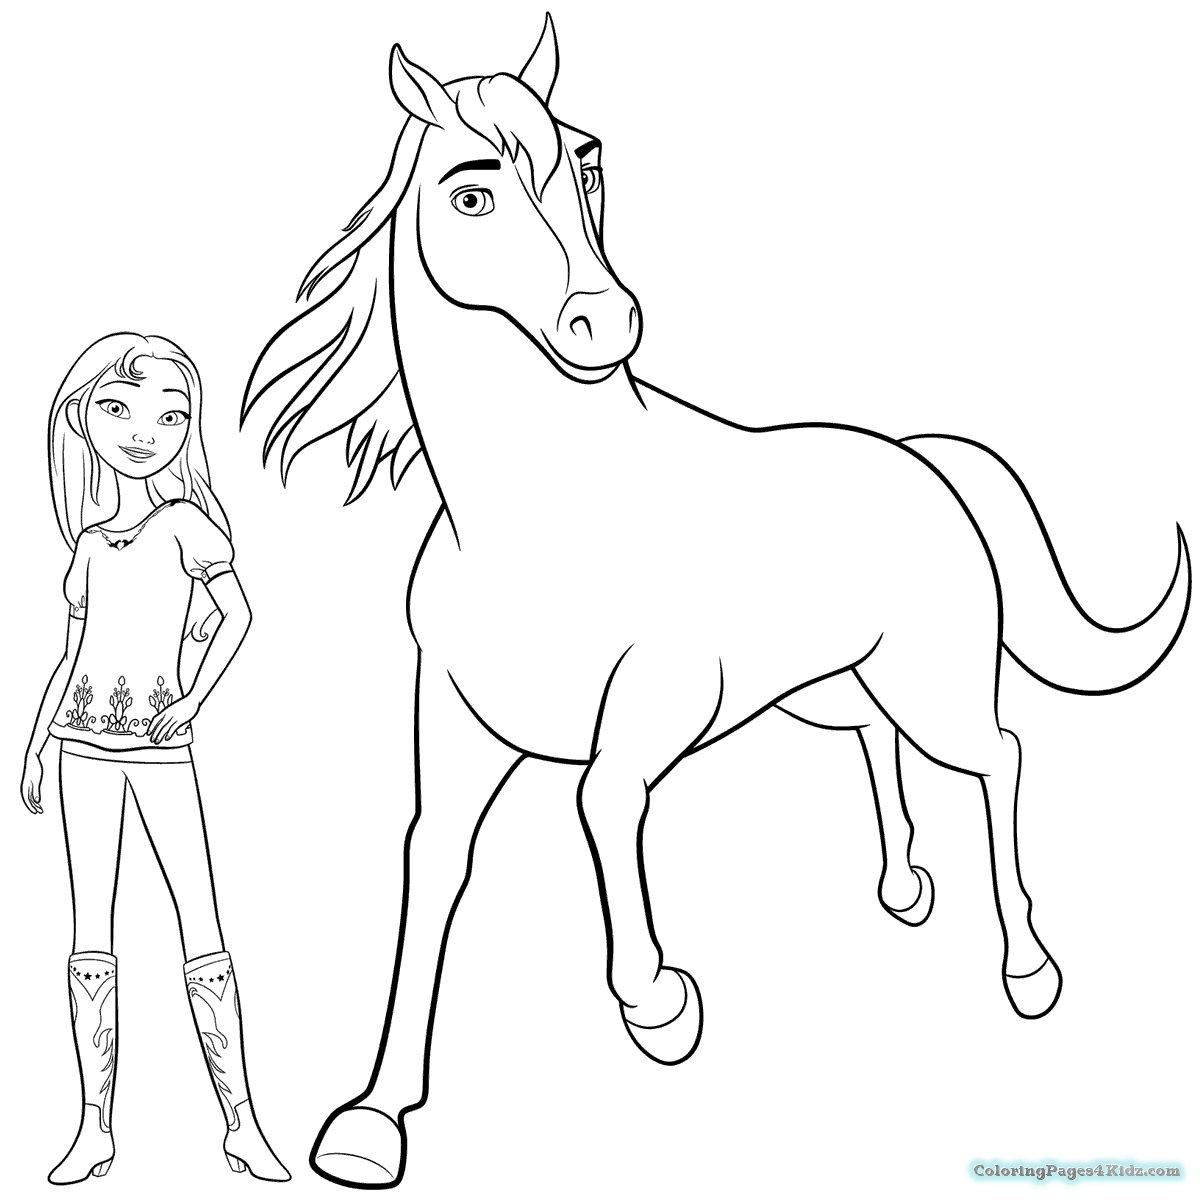 dreamworks spirit coloring pages coloring pages dreamworks spirit riding printable spirit dreamworks pages coloring 